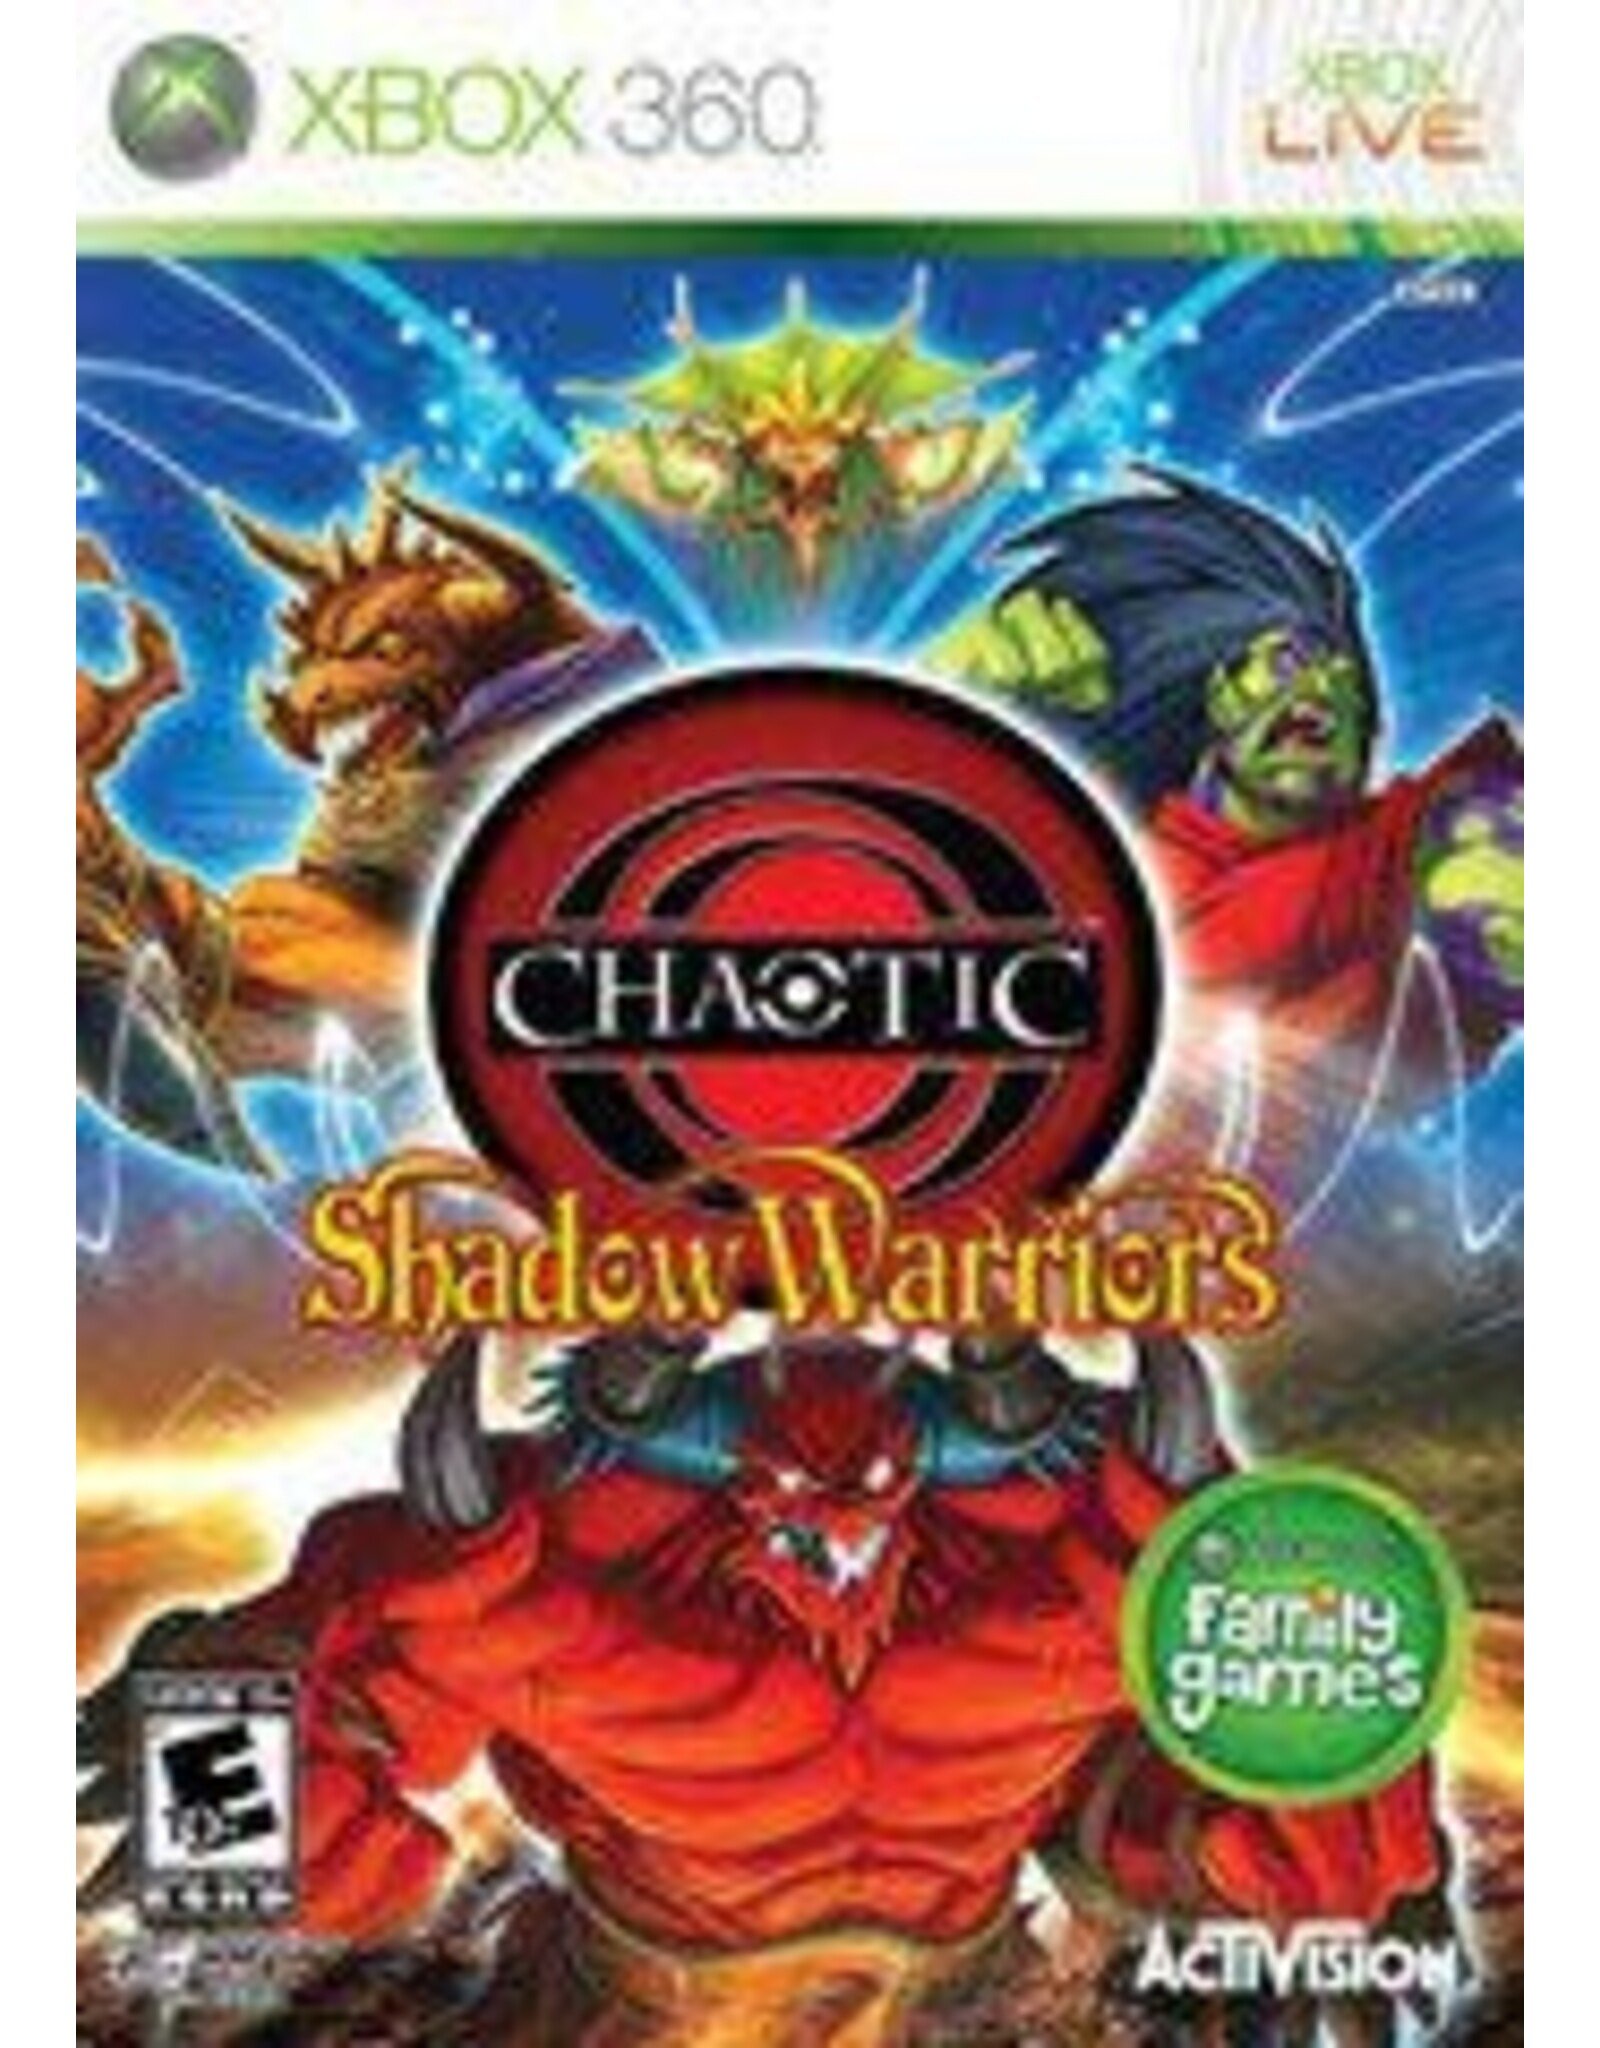 Xbox 360 Chaotic: Shadow Warriors (Used)